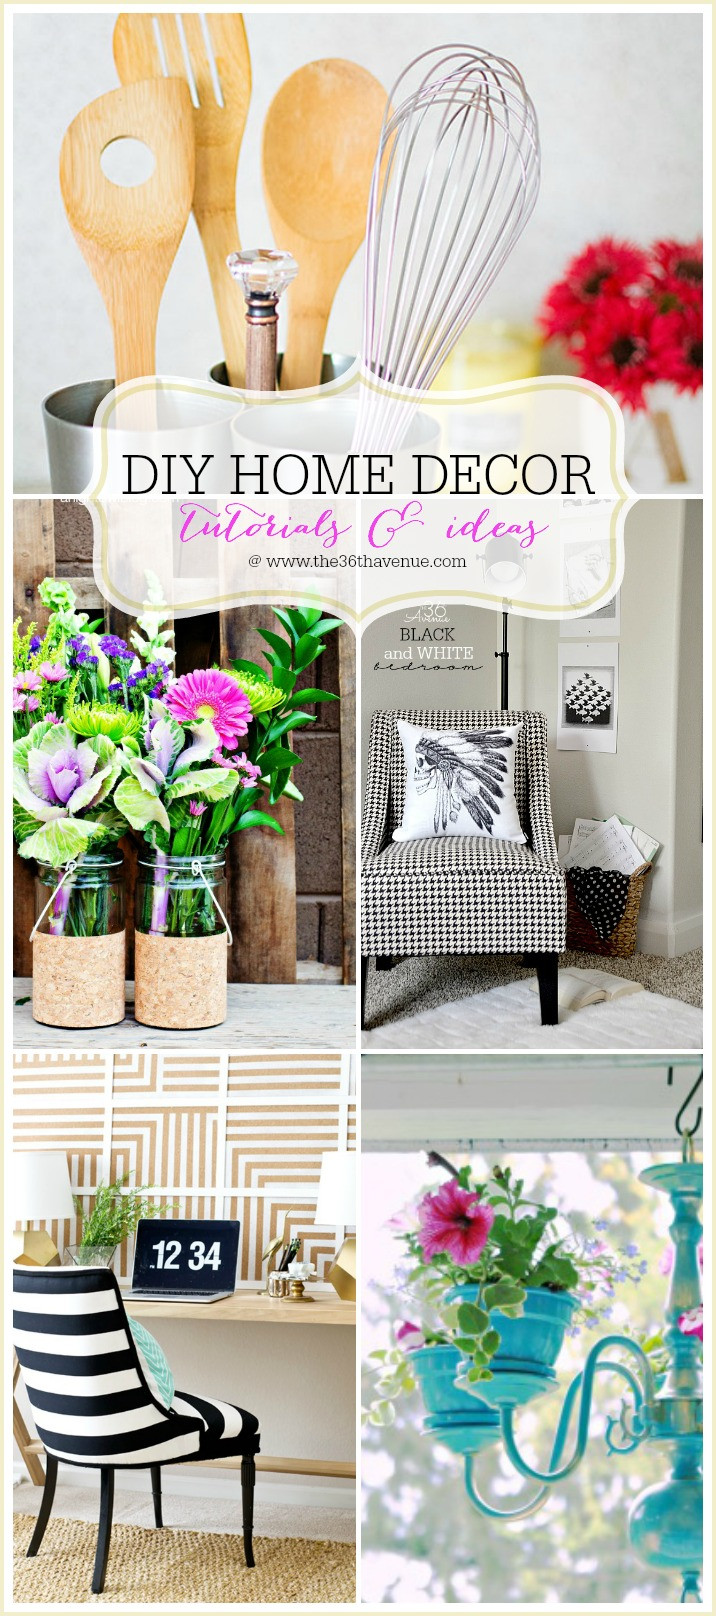 DIY Decorating Projects
 The 36th AVENUE Home Decor DIY Projects